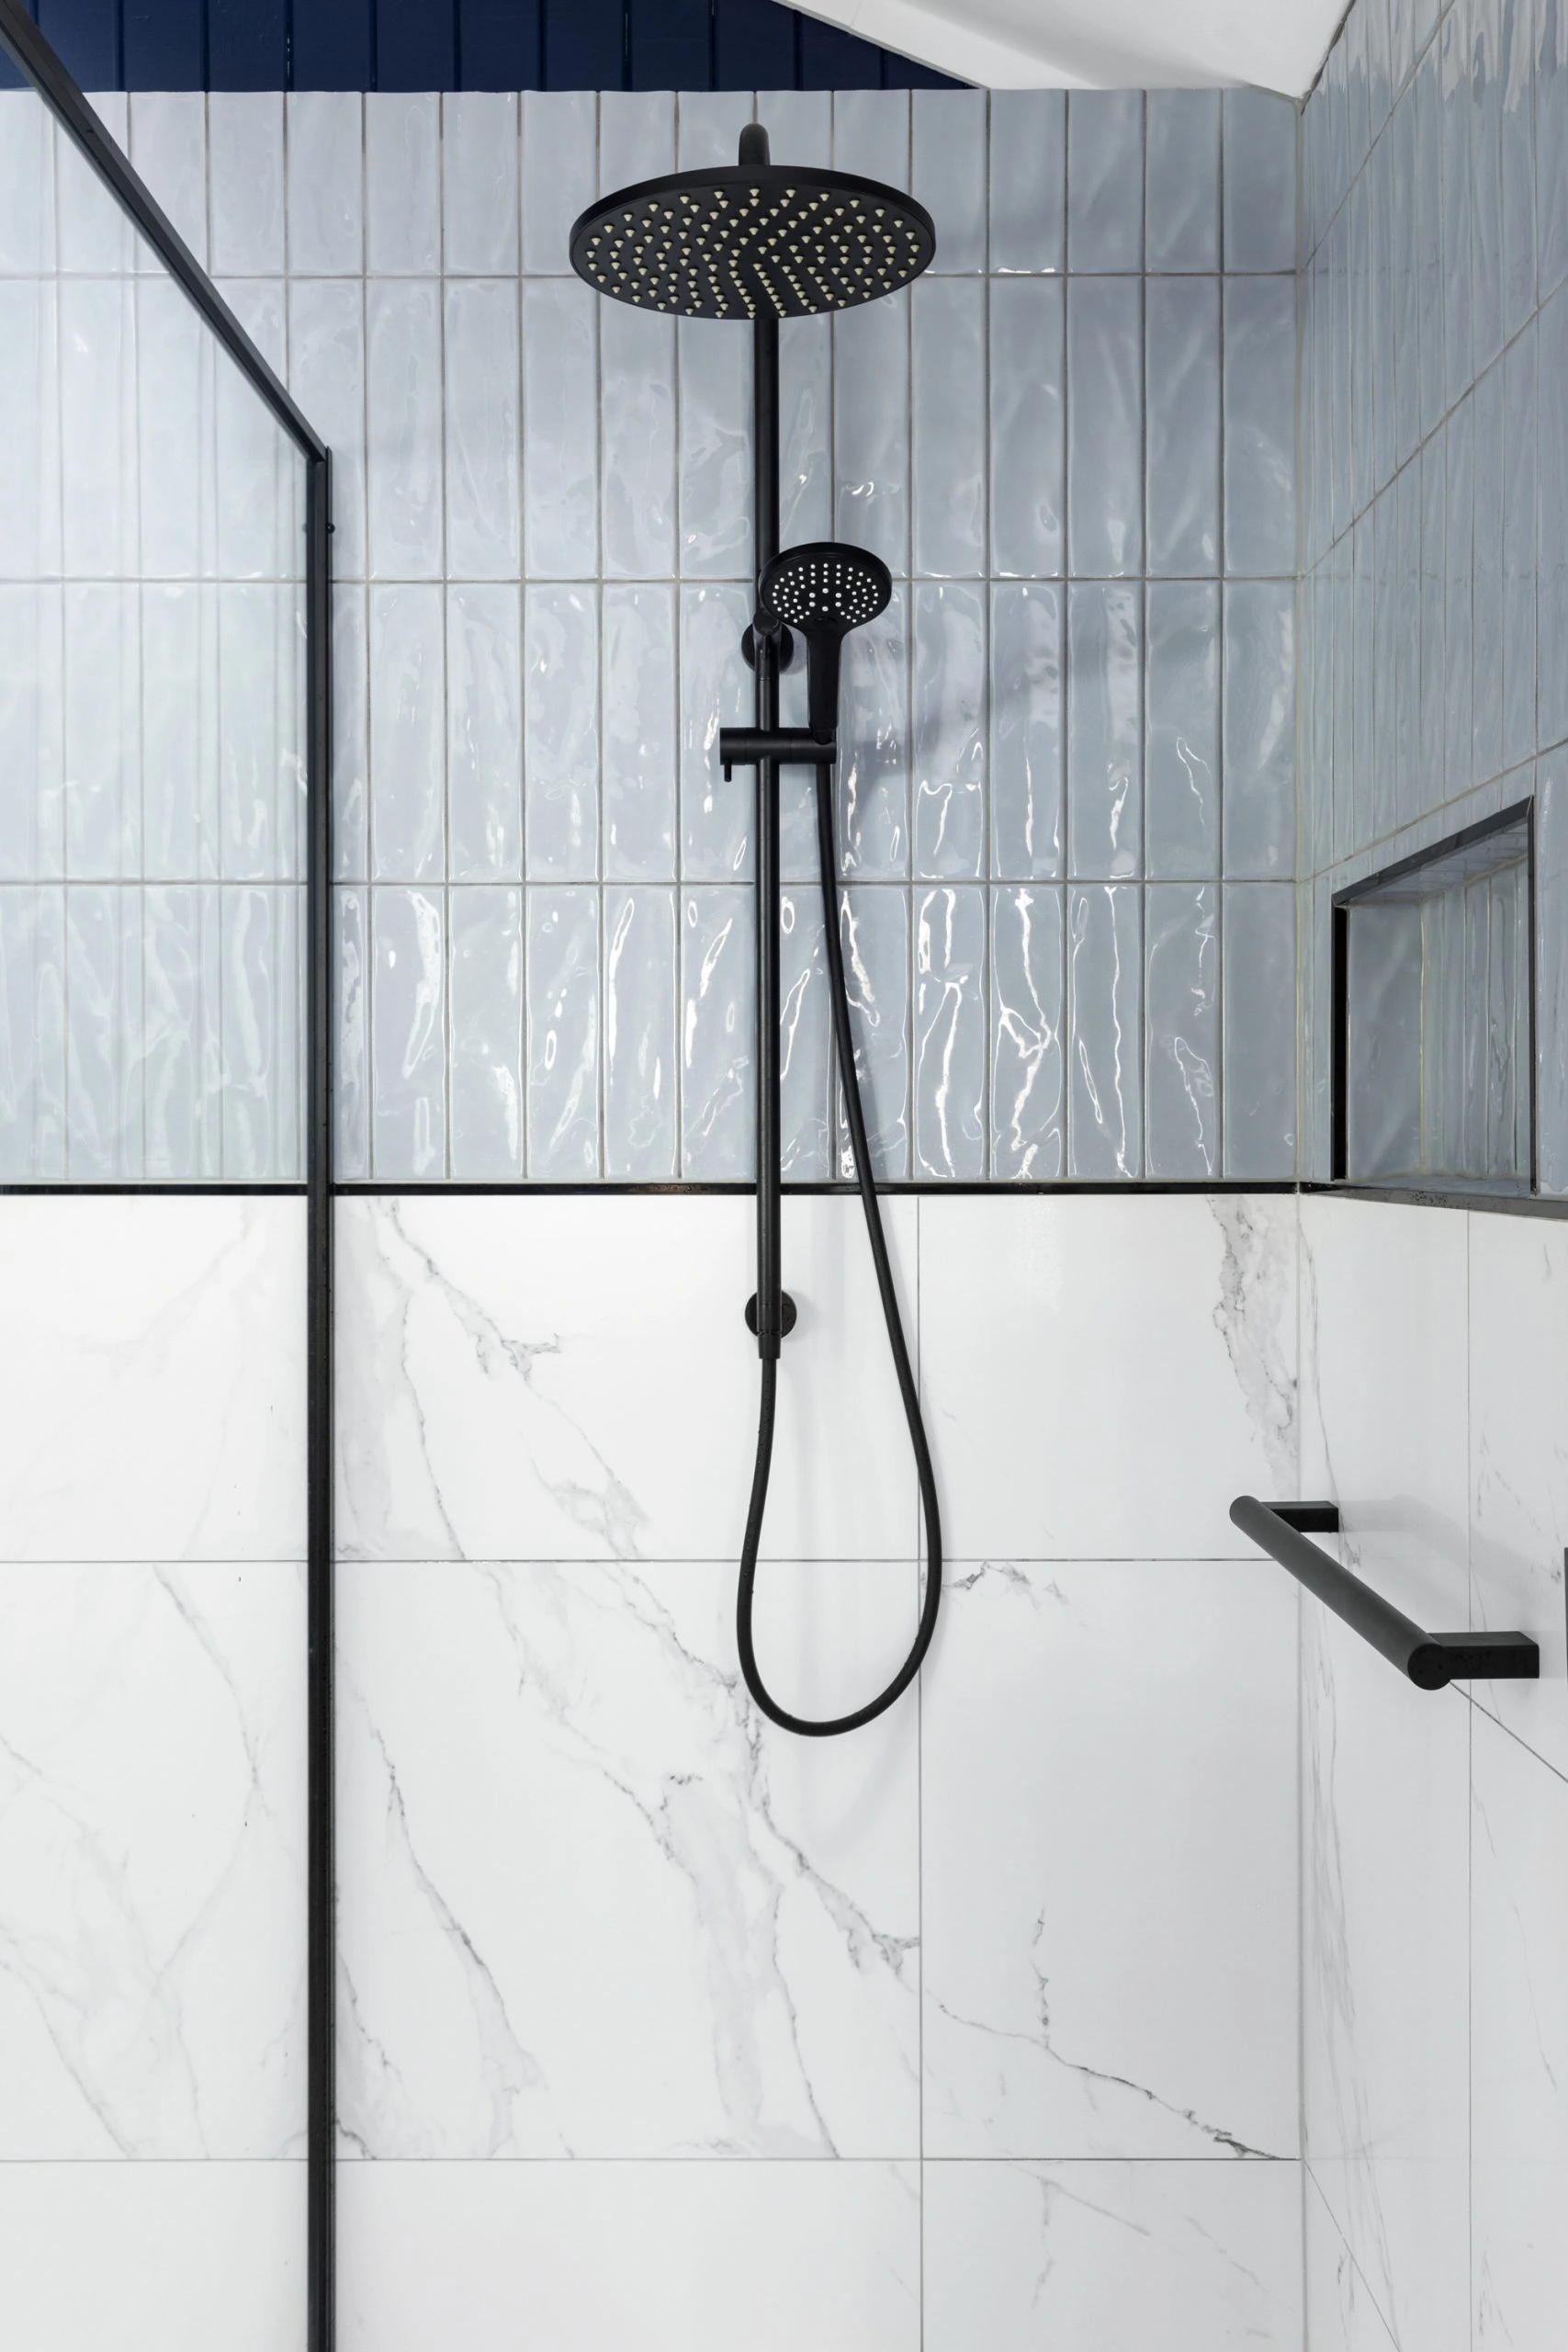 Mixed bathroom tiles in a modern bathroom with black details